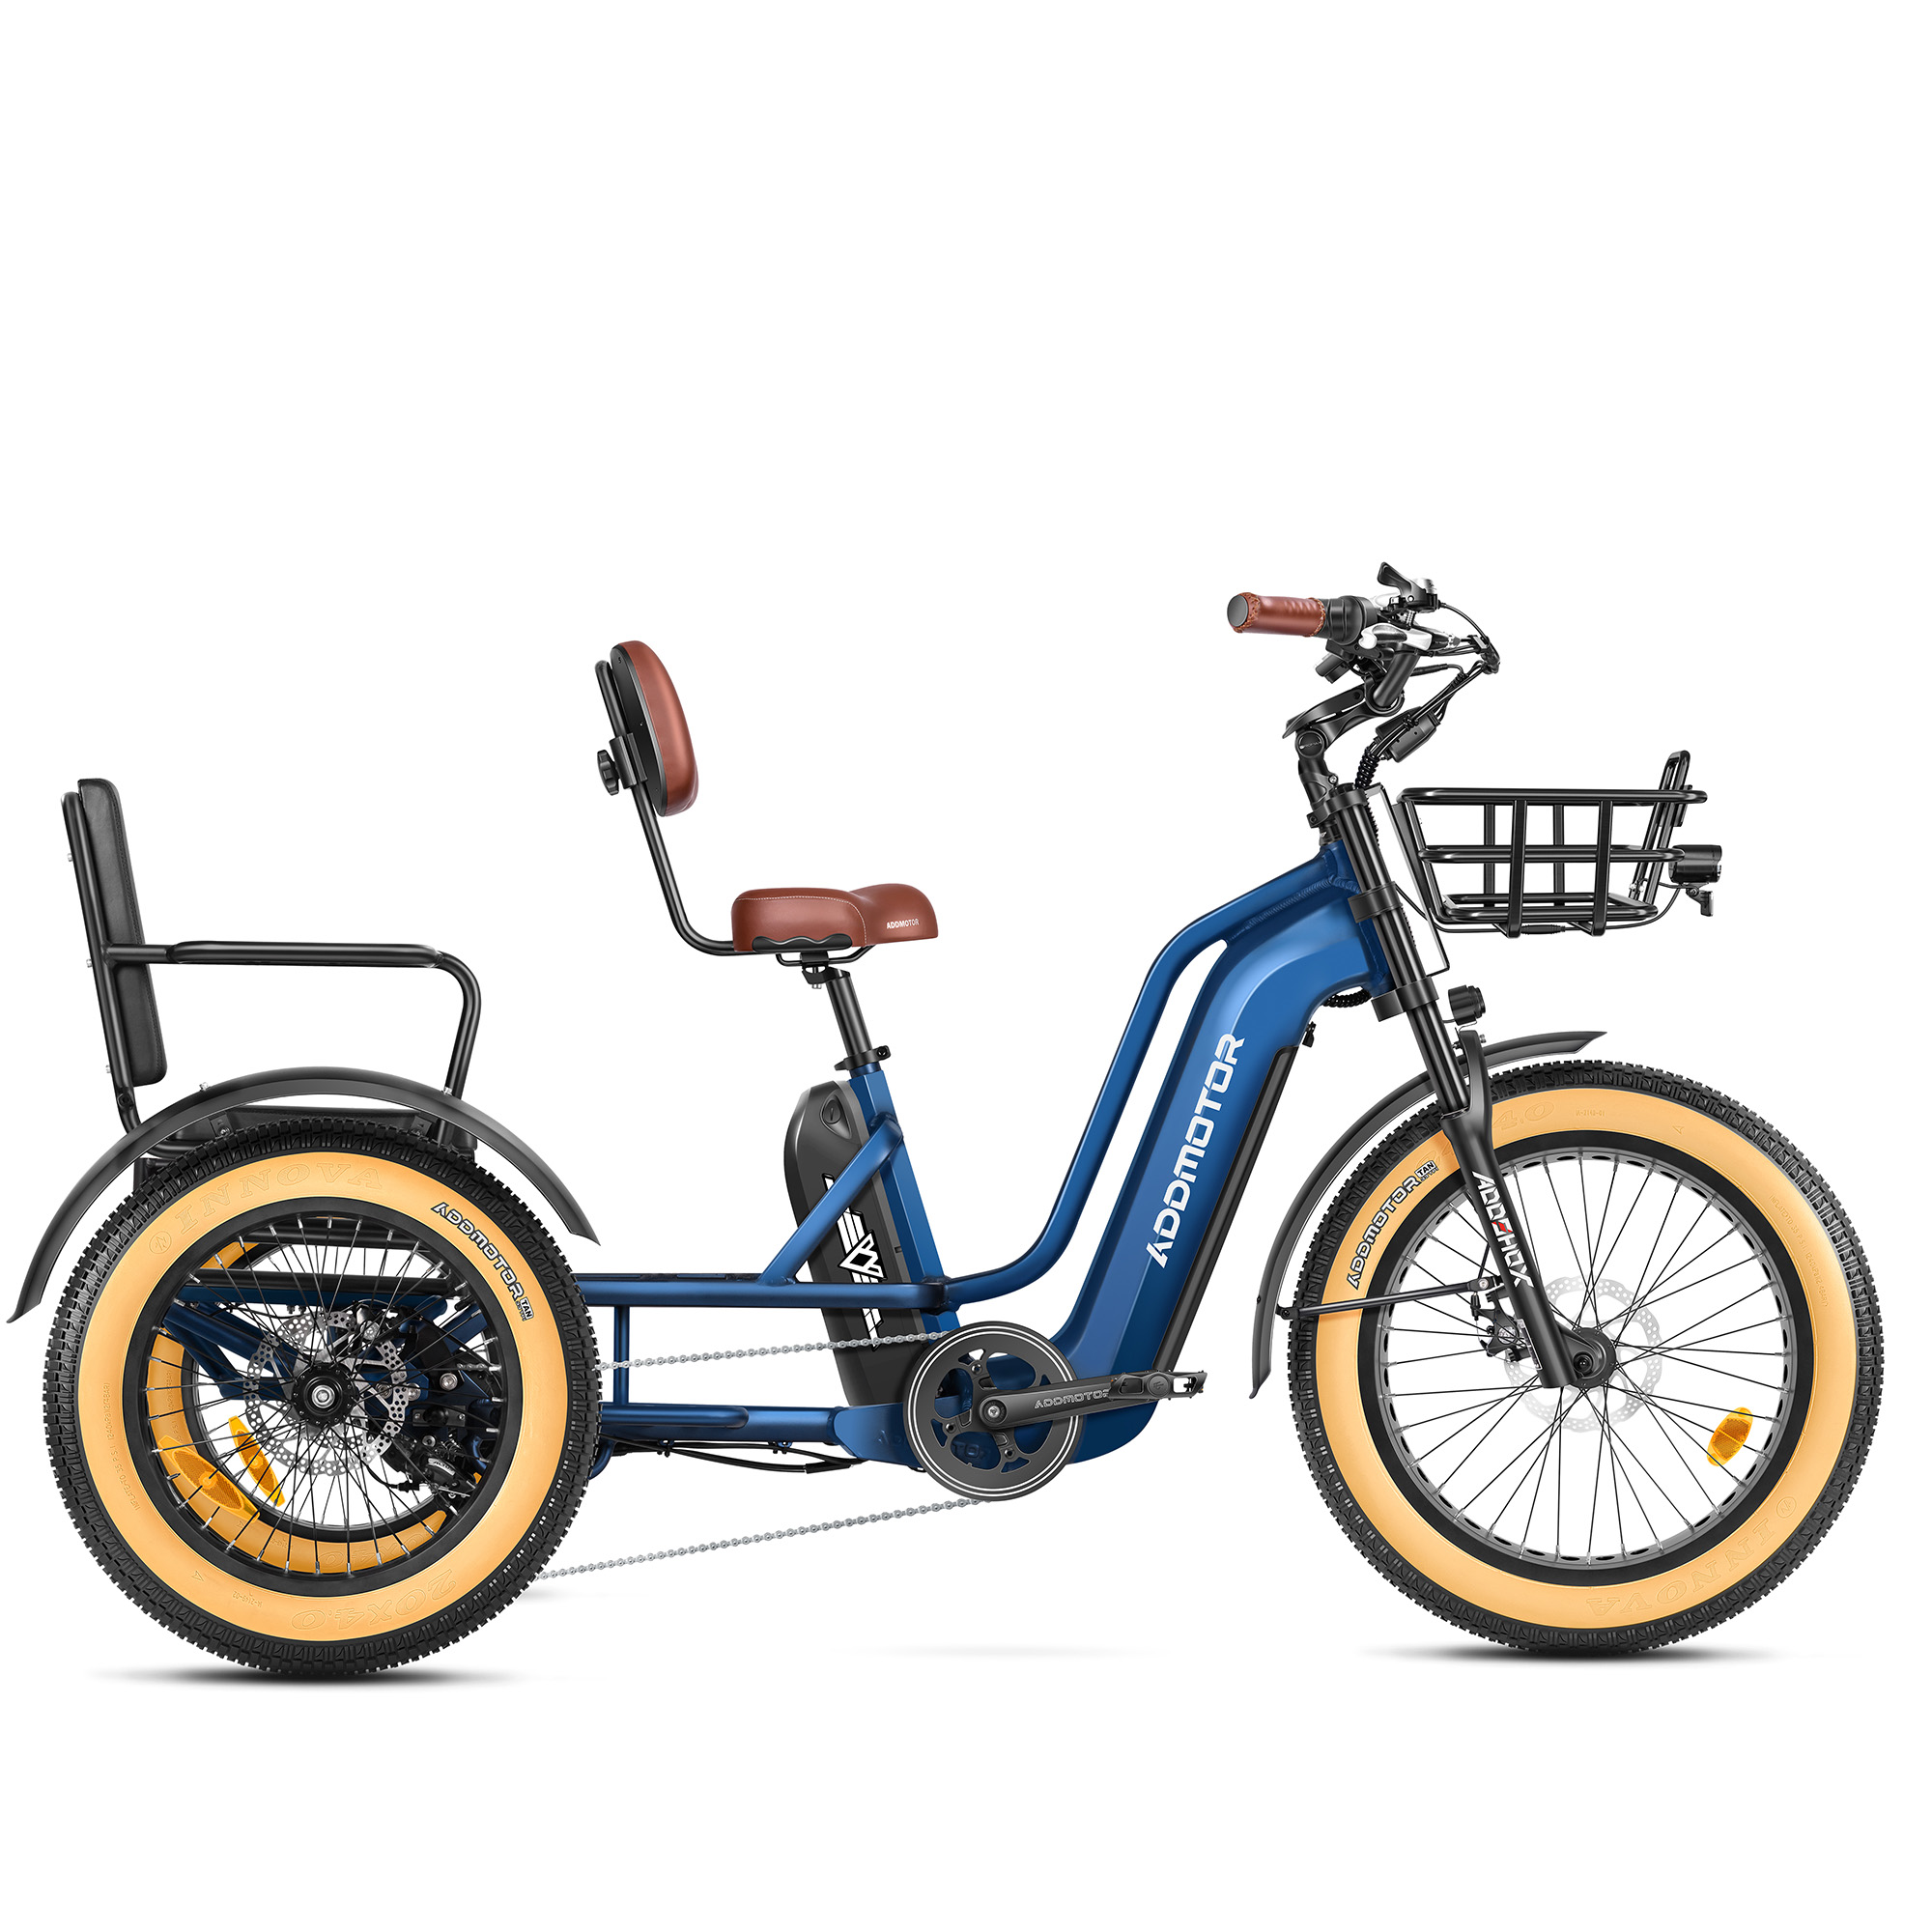 Addmotor Greattan L Dual-Battery Electric Trike with Passenger Seat | Fat Tire 750W Built-in Battery Design Electric Tricycle | Neptune Blue